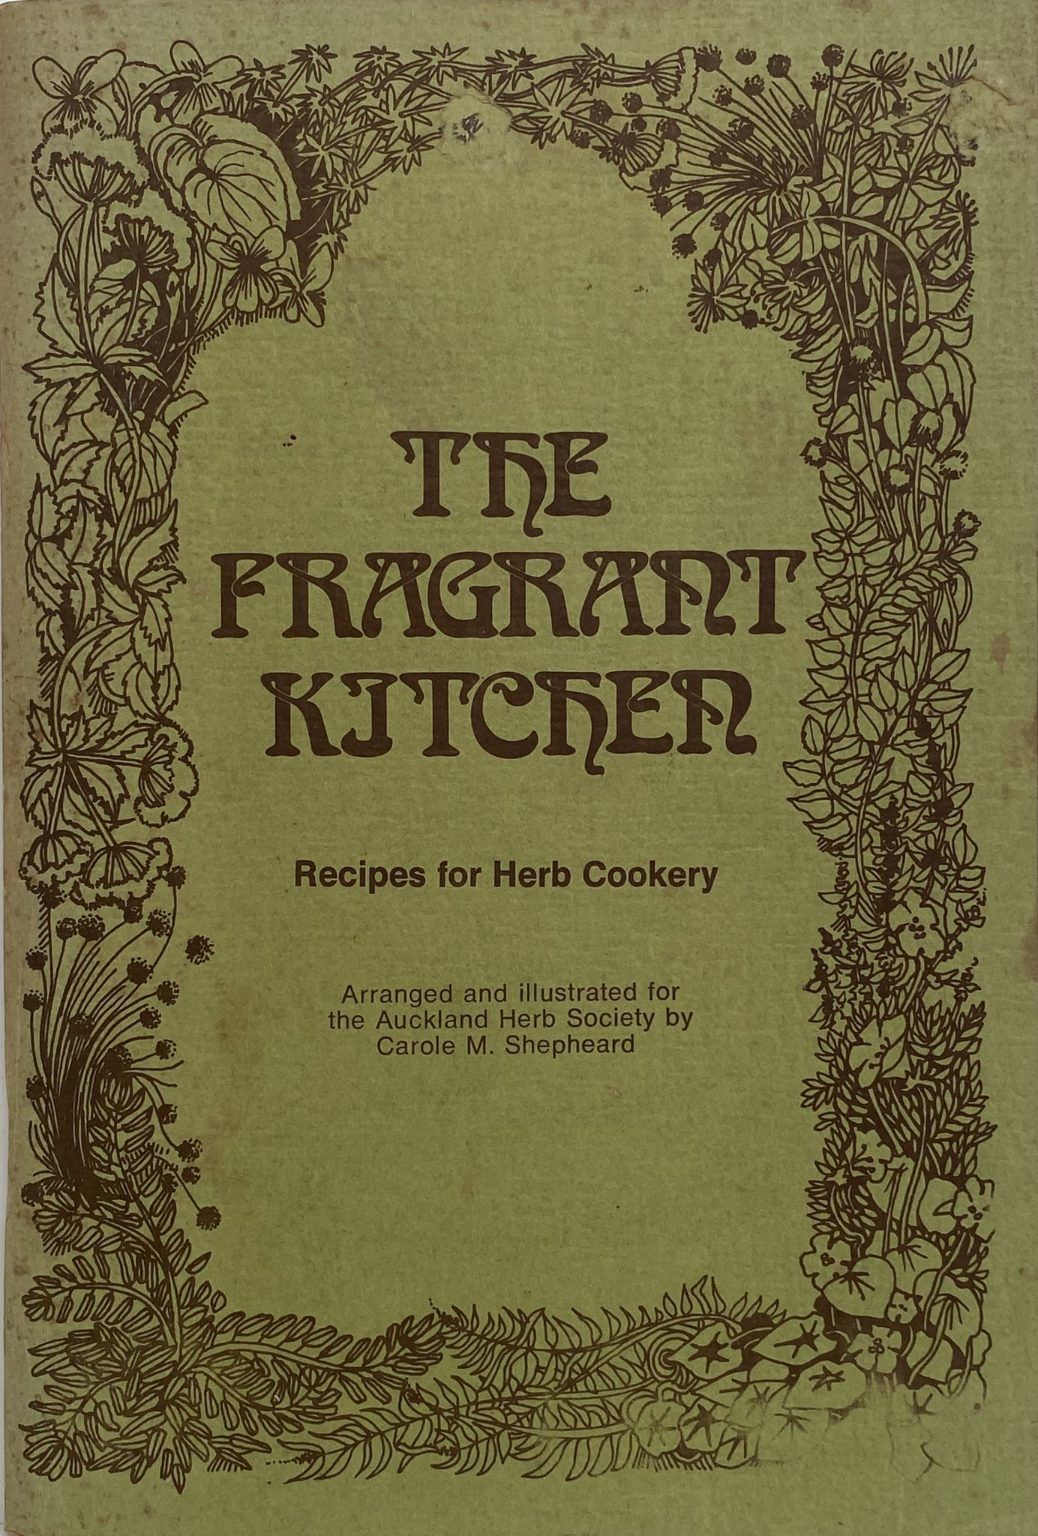 THE FRAGRANT KITCHEN: Recipes for herb cookery